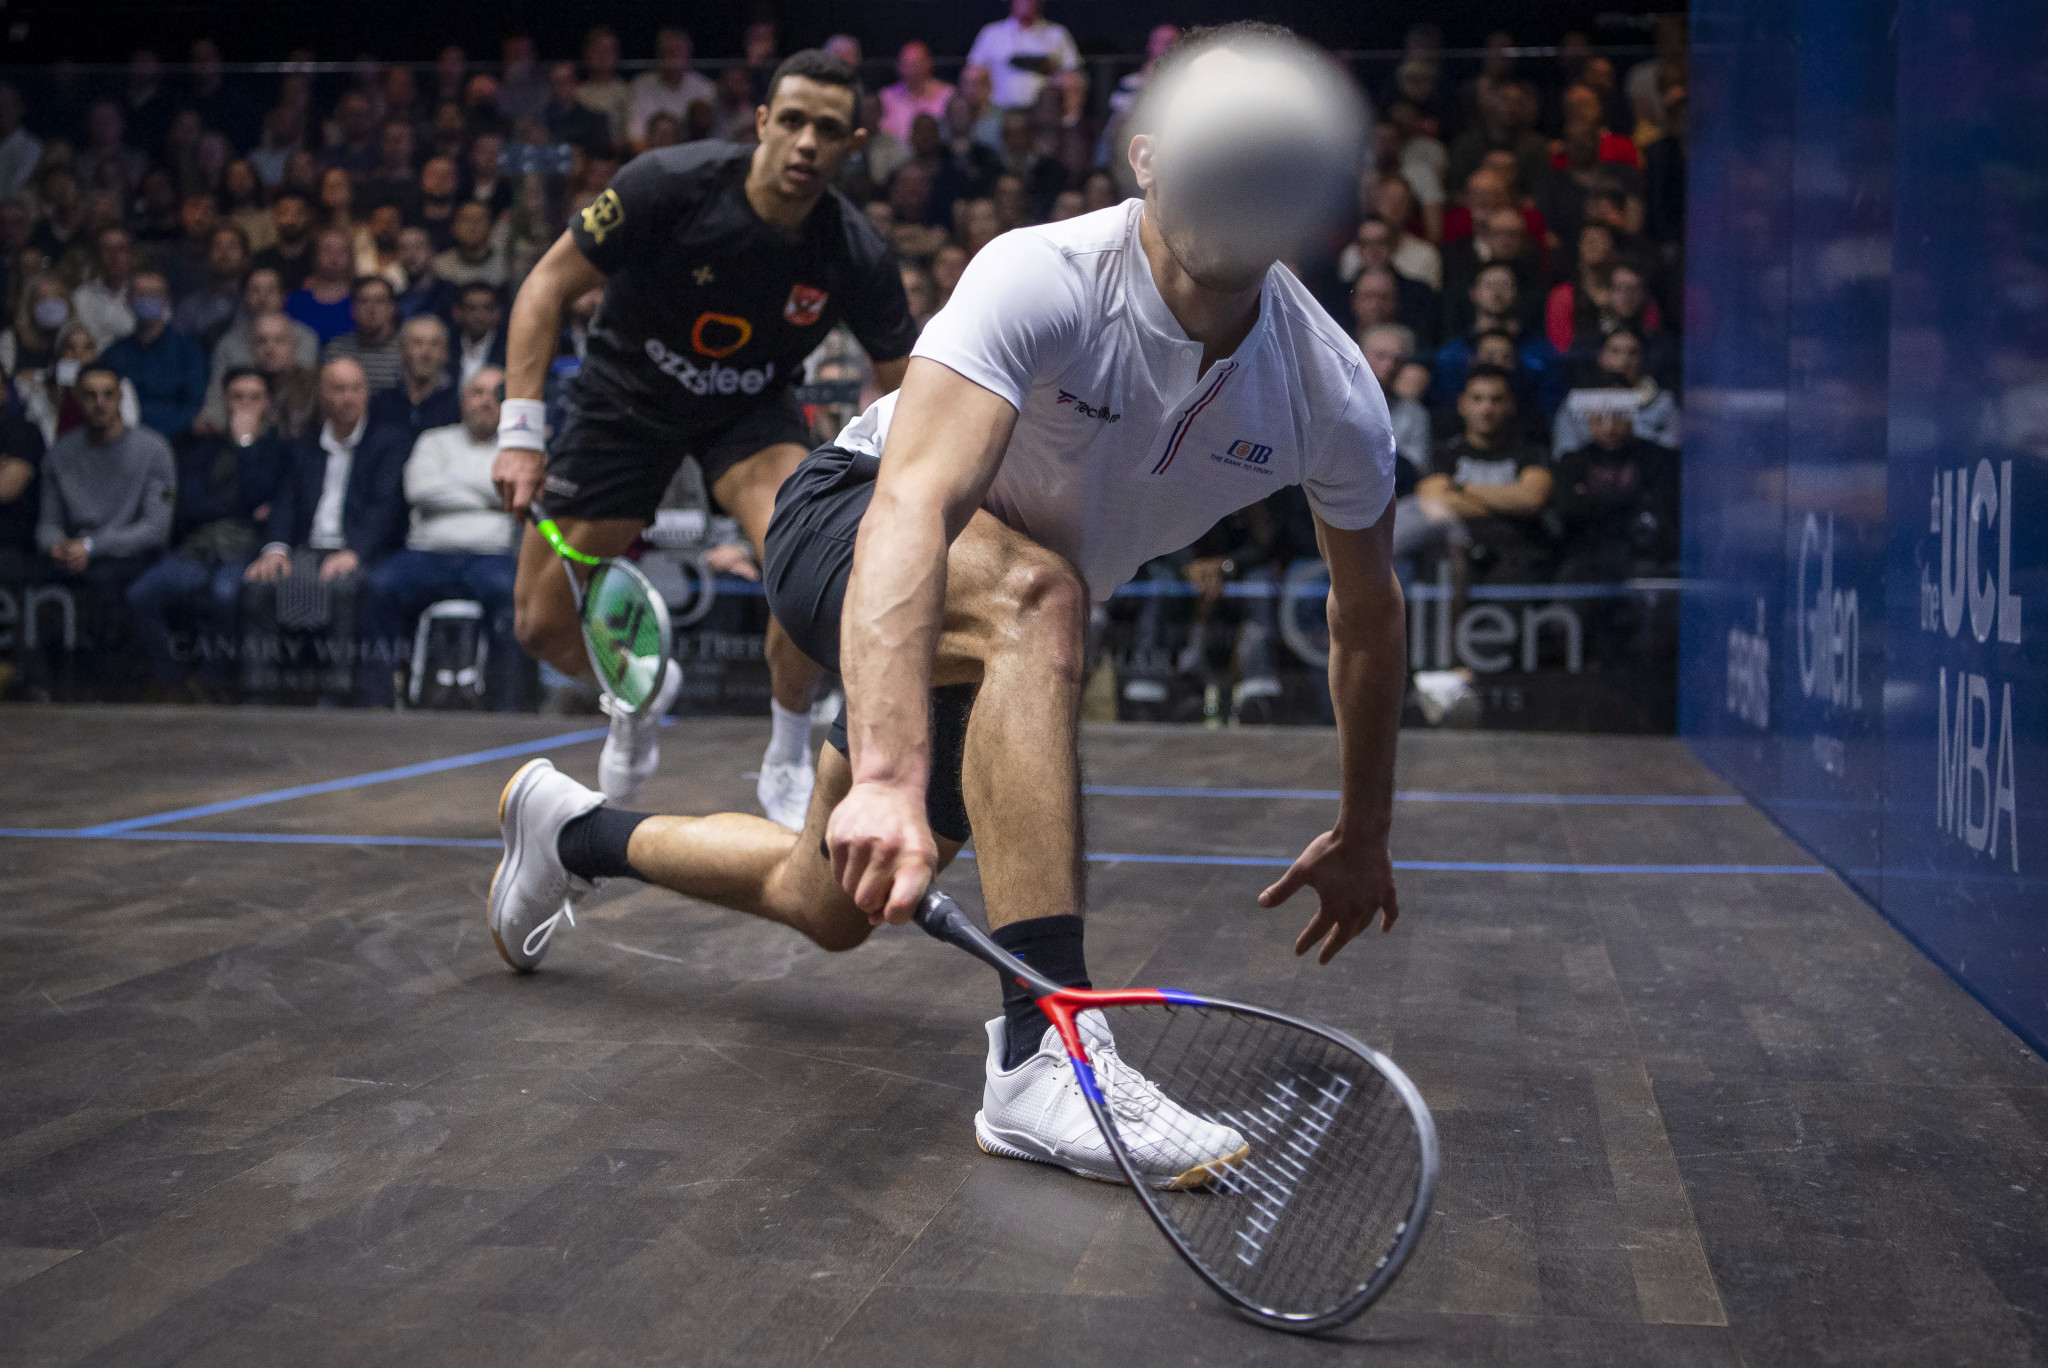 Egypt are squash powerhouses, and one of nine teams set to take part in the Squash World Cup in June ©Getty Images